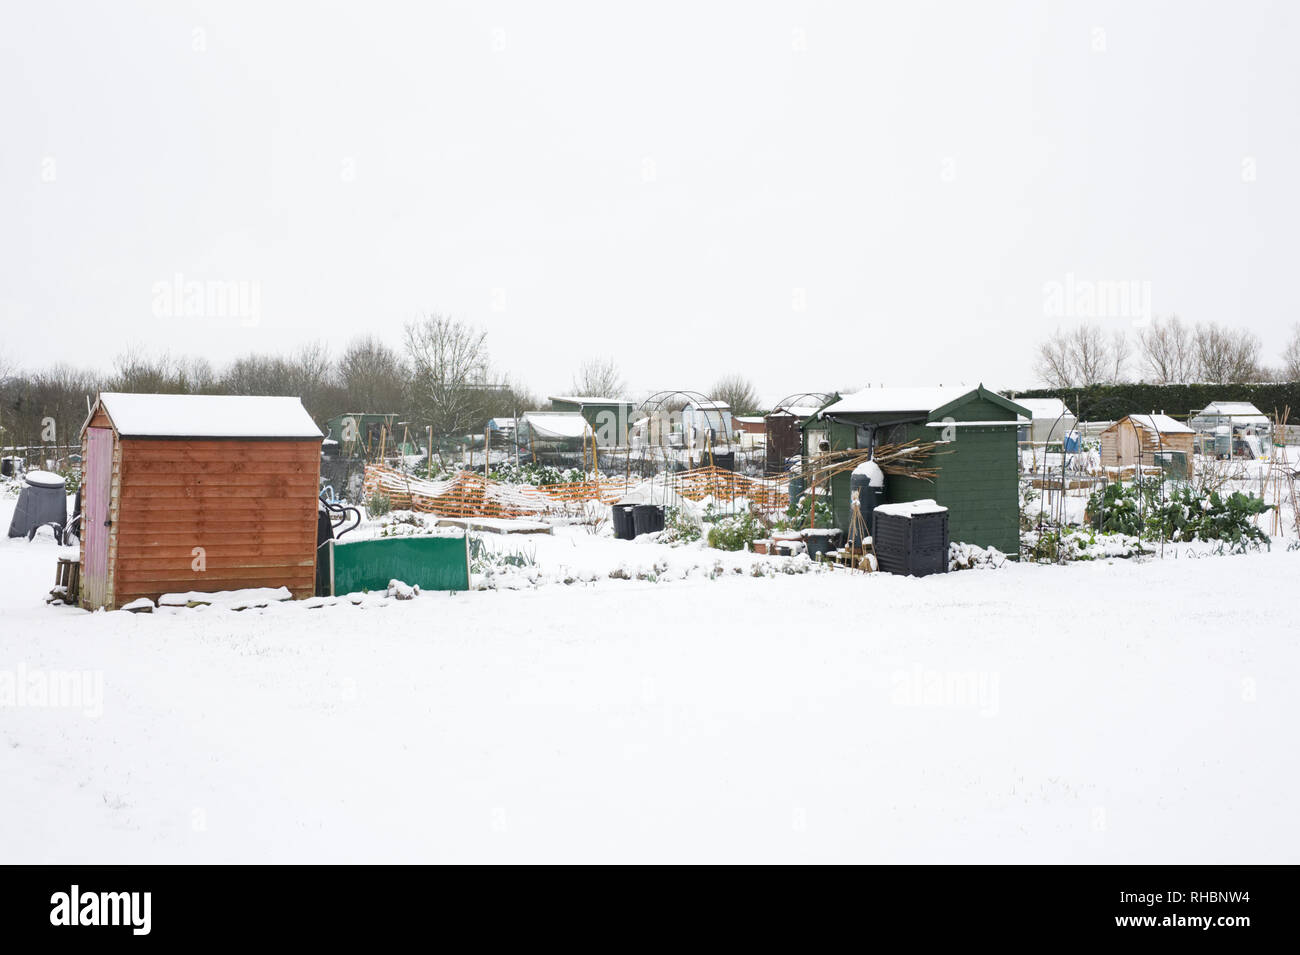 Allotment plots in the Winter snow. Stock Photo